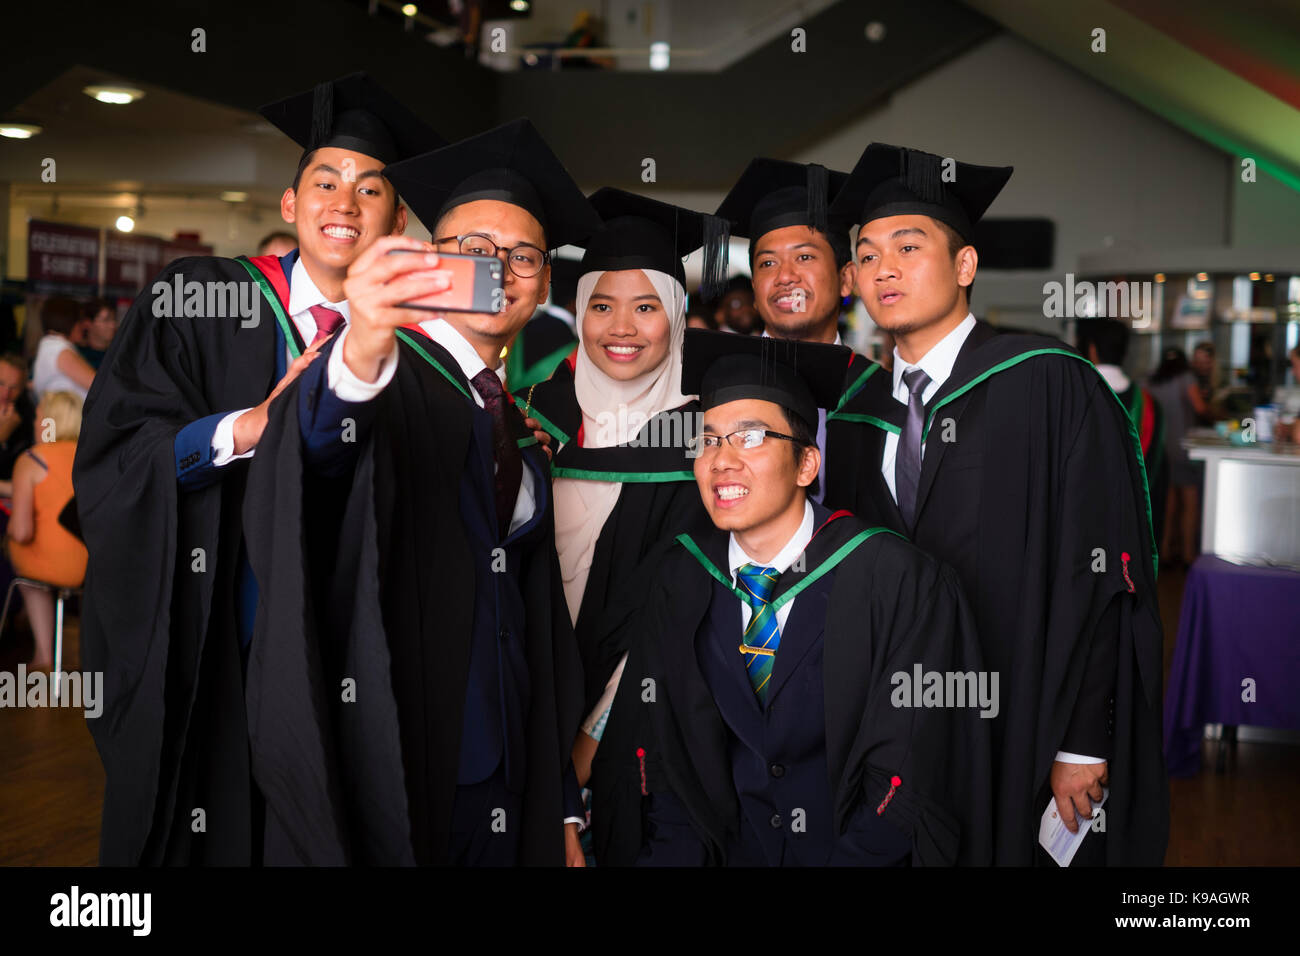 Higher Education in the UK: A group of foreign overseas Asian Aberystwyth University students wearing traditional academic gowns and mortar boards taking a selfie photograph  on their graduation day, July 2017 Stock Photo